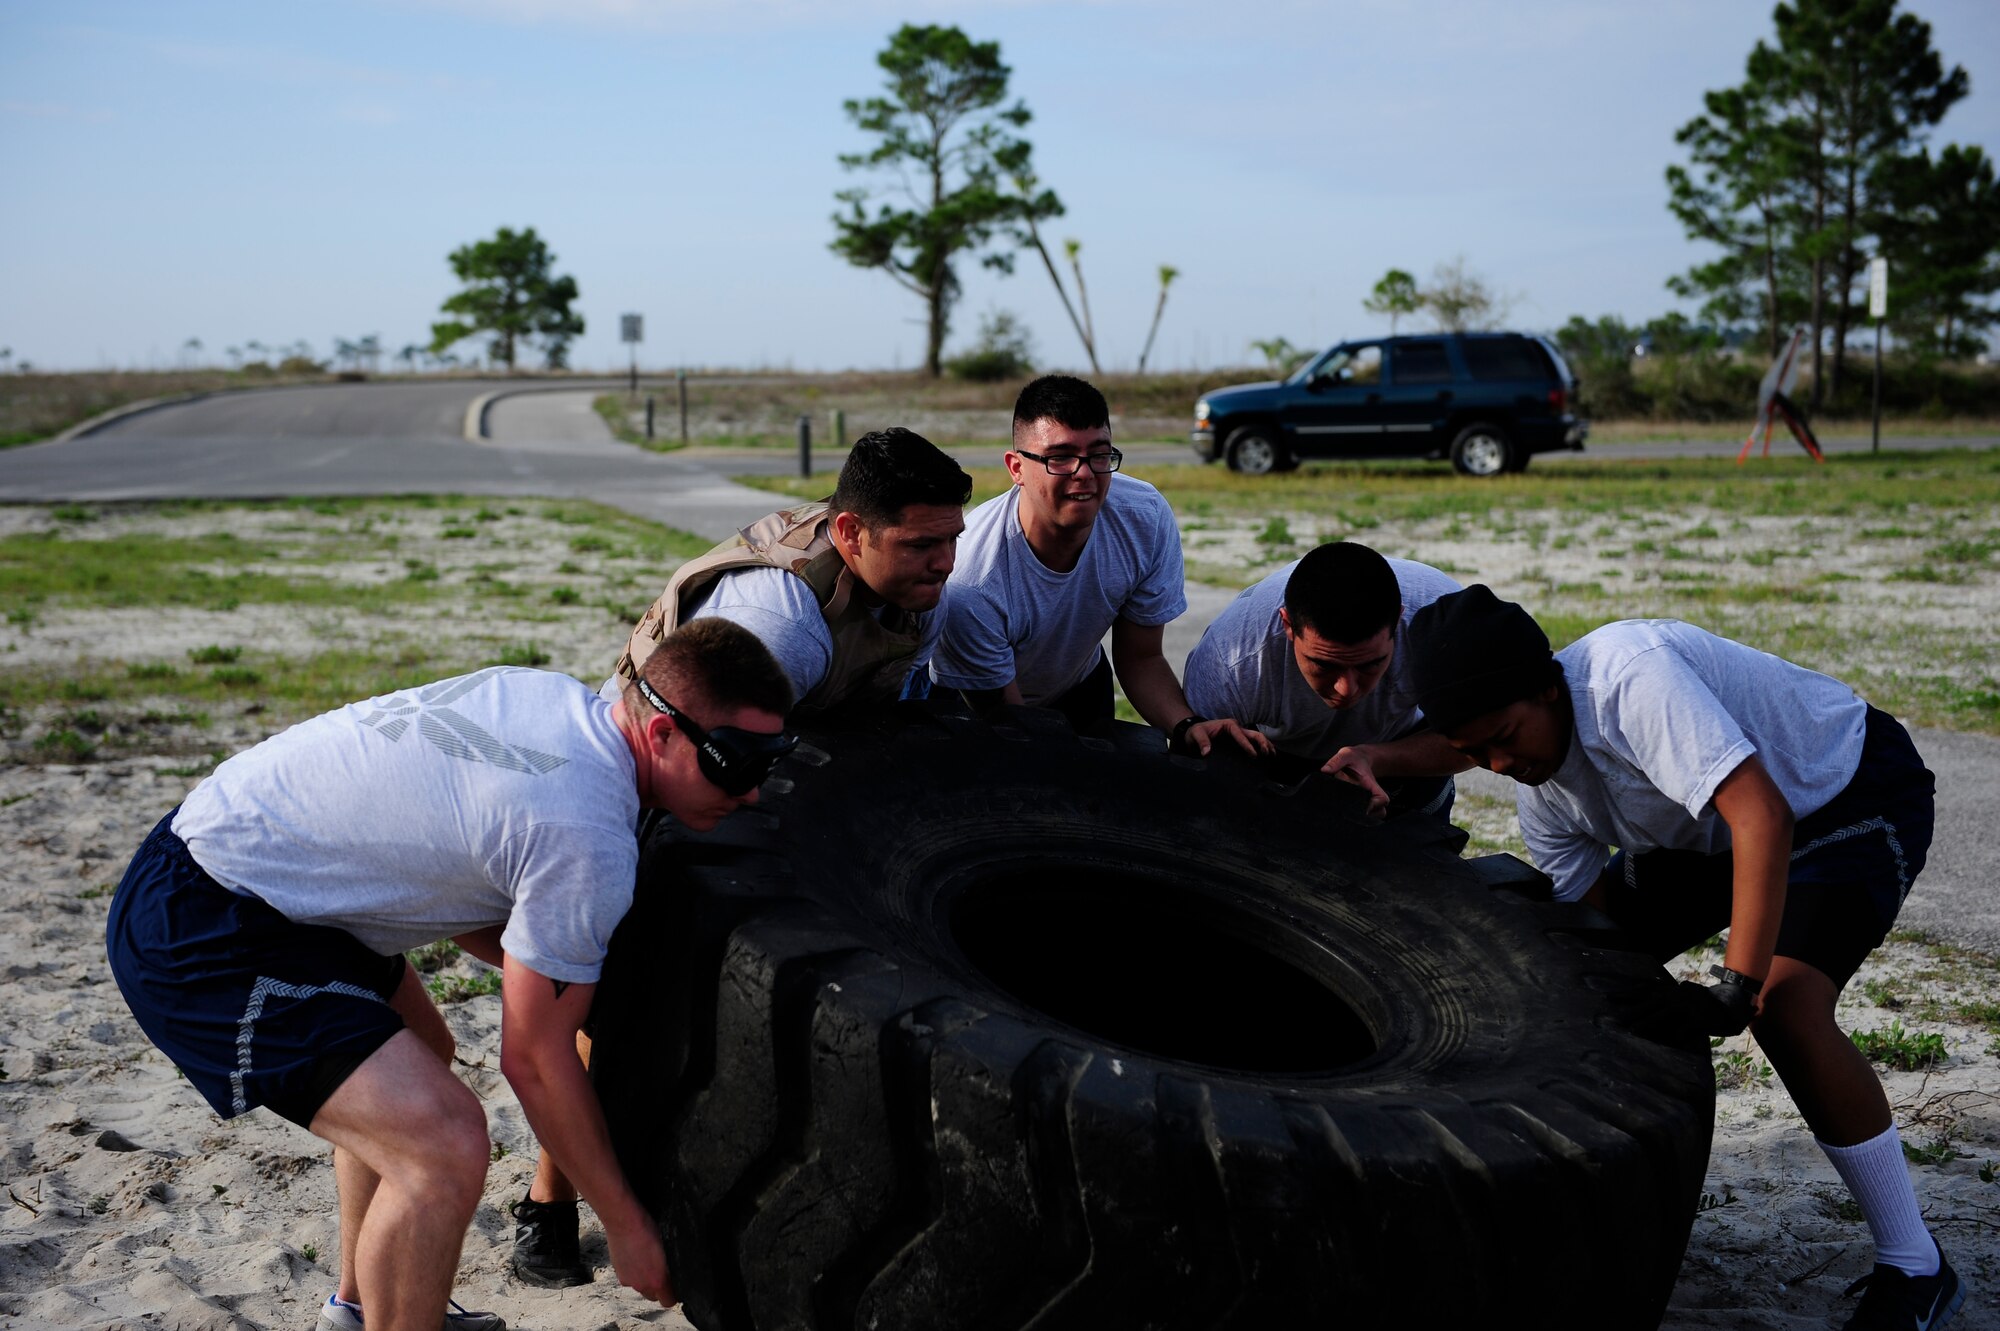 Airmen flip a tire during the CLEAR Challenge Obstacle Course on Hurlburt Field, Fla., April 11, 2014. The obstacle course was designed to help build camaraderie between teammates while raising their awareness about sexual assault. (U.S. Air Force photo/Senior Airman Krystal m. Garrett)  